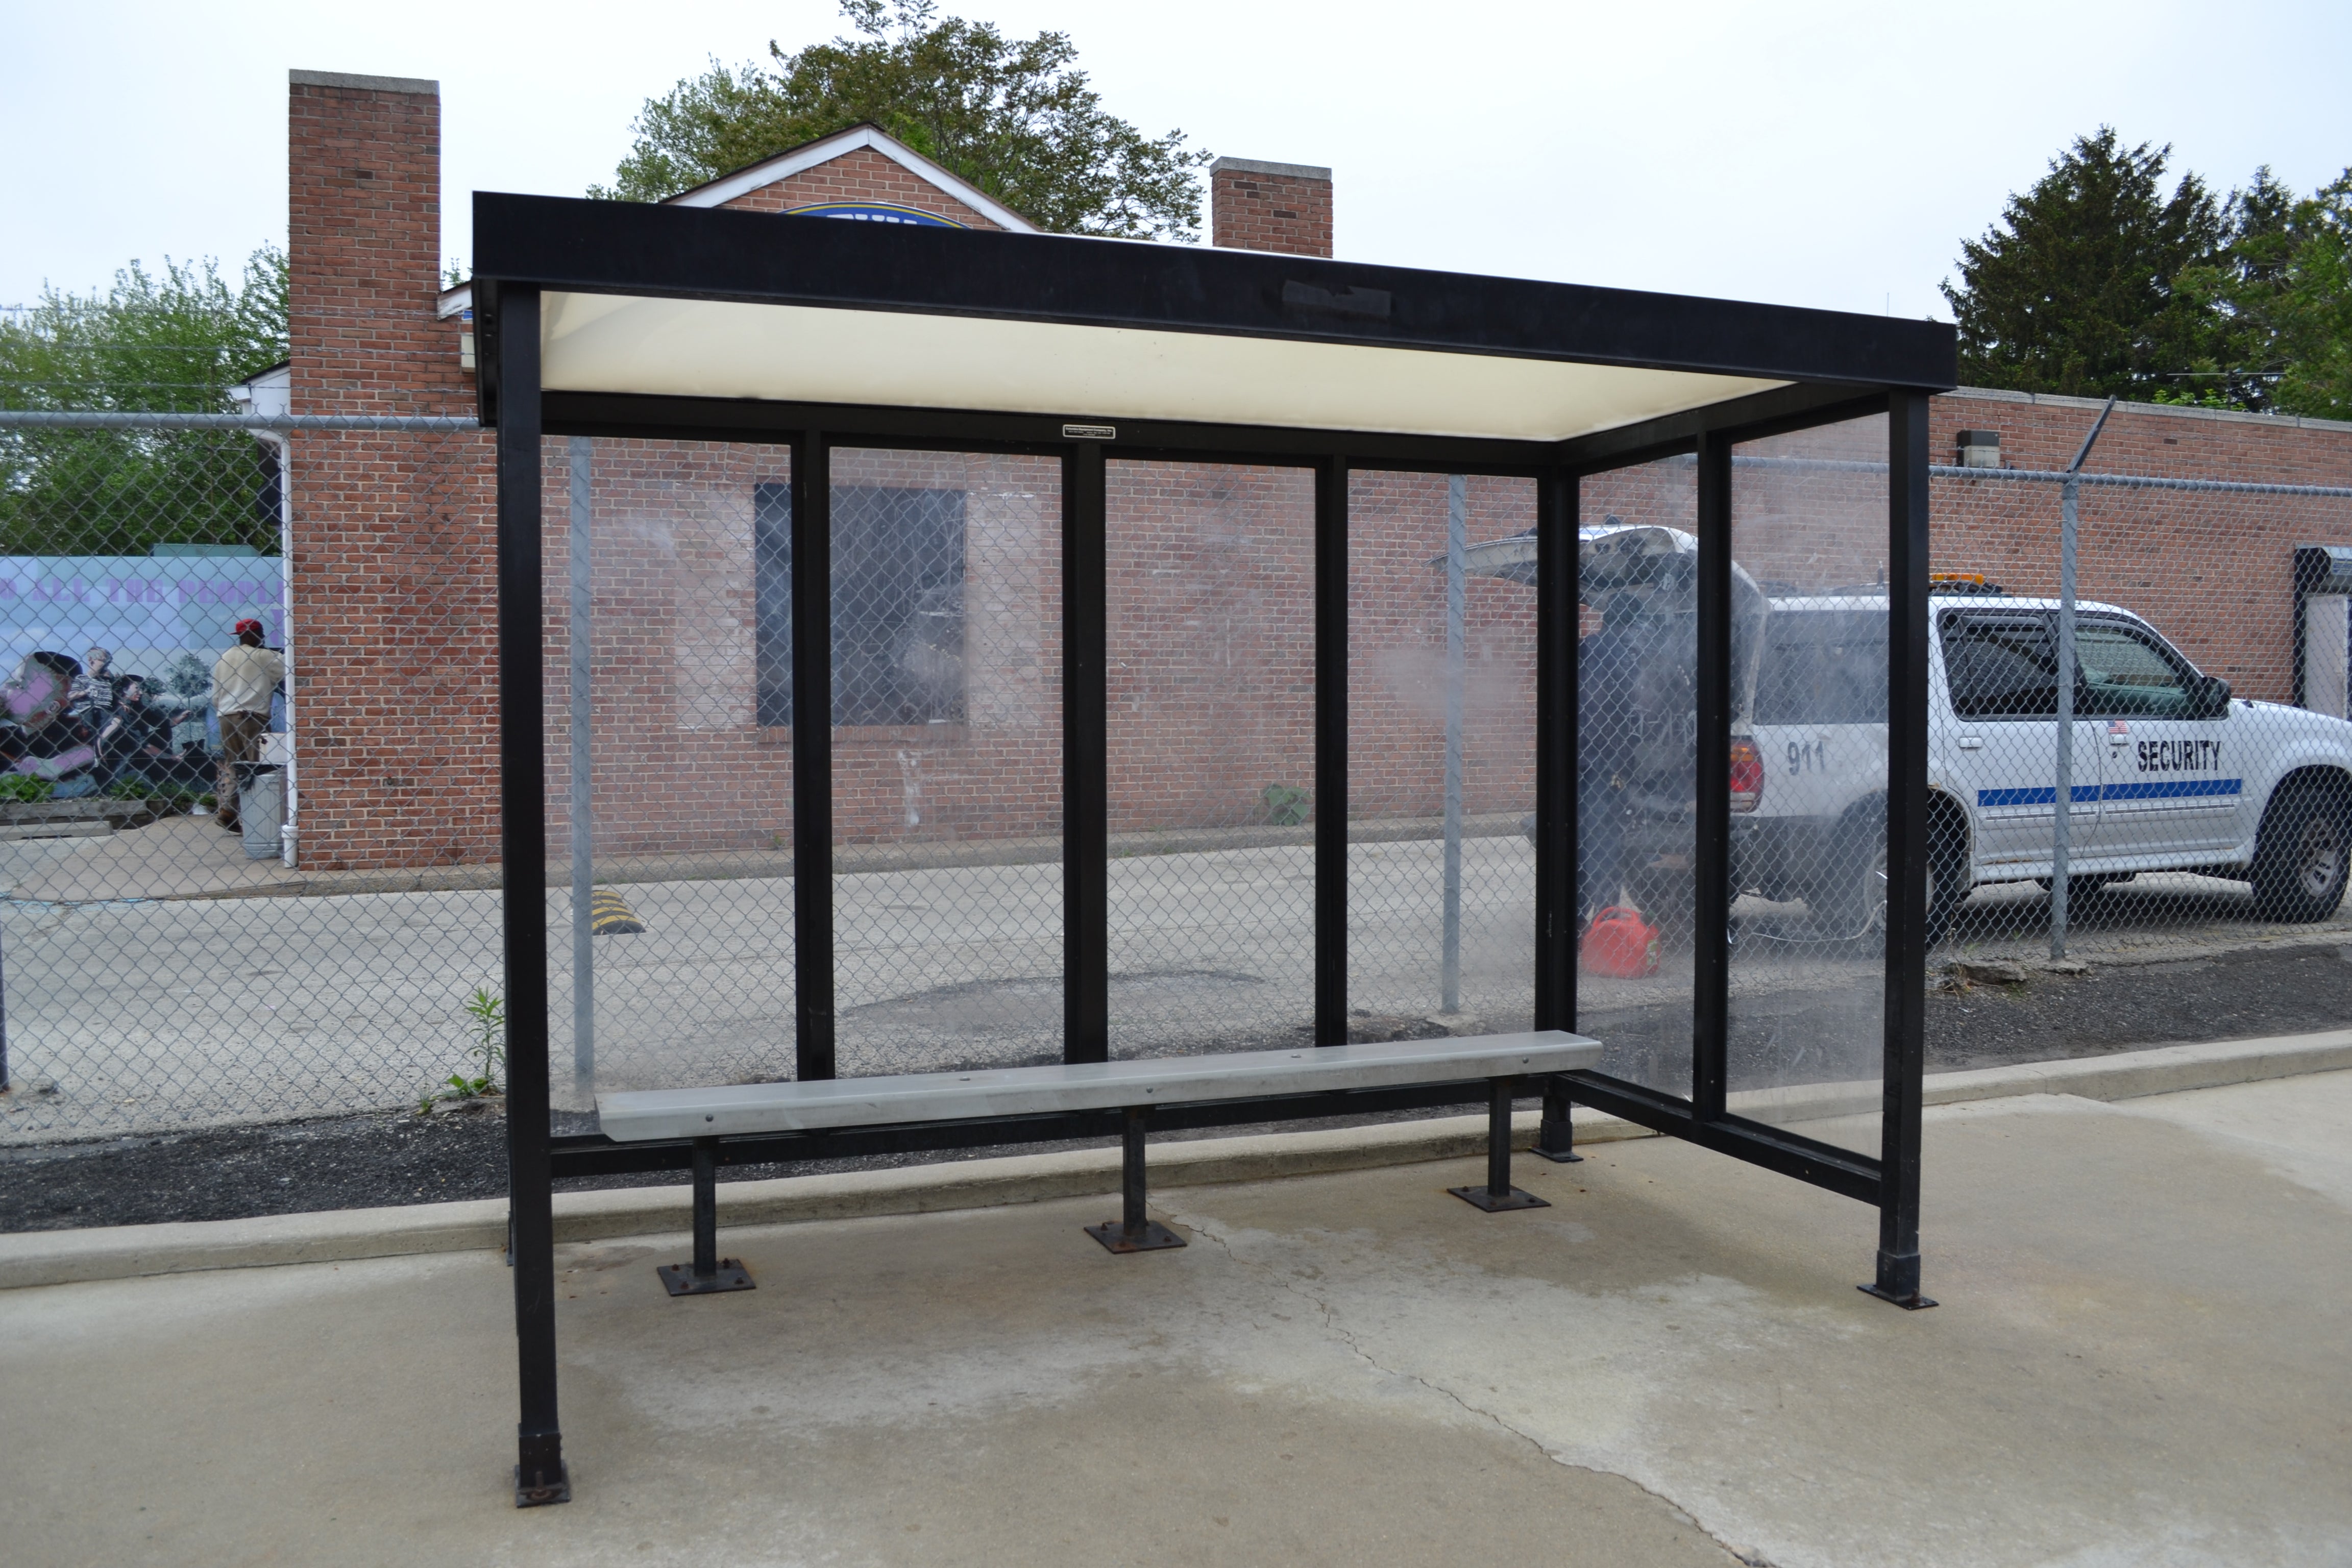 The $1.4 million project will build two new passenger shelters